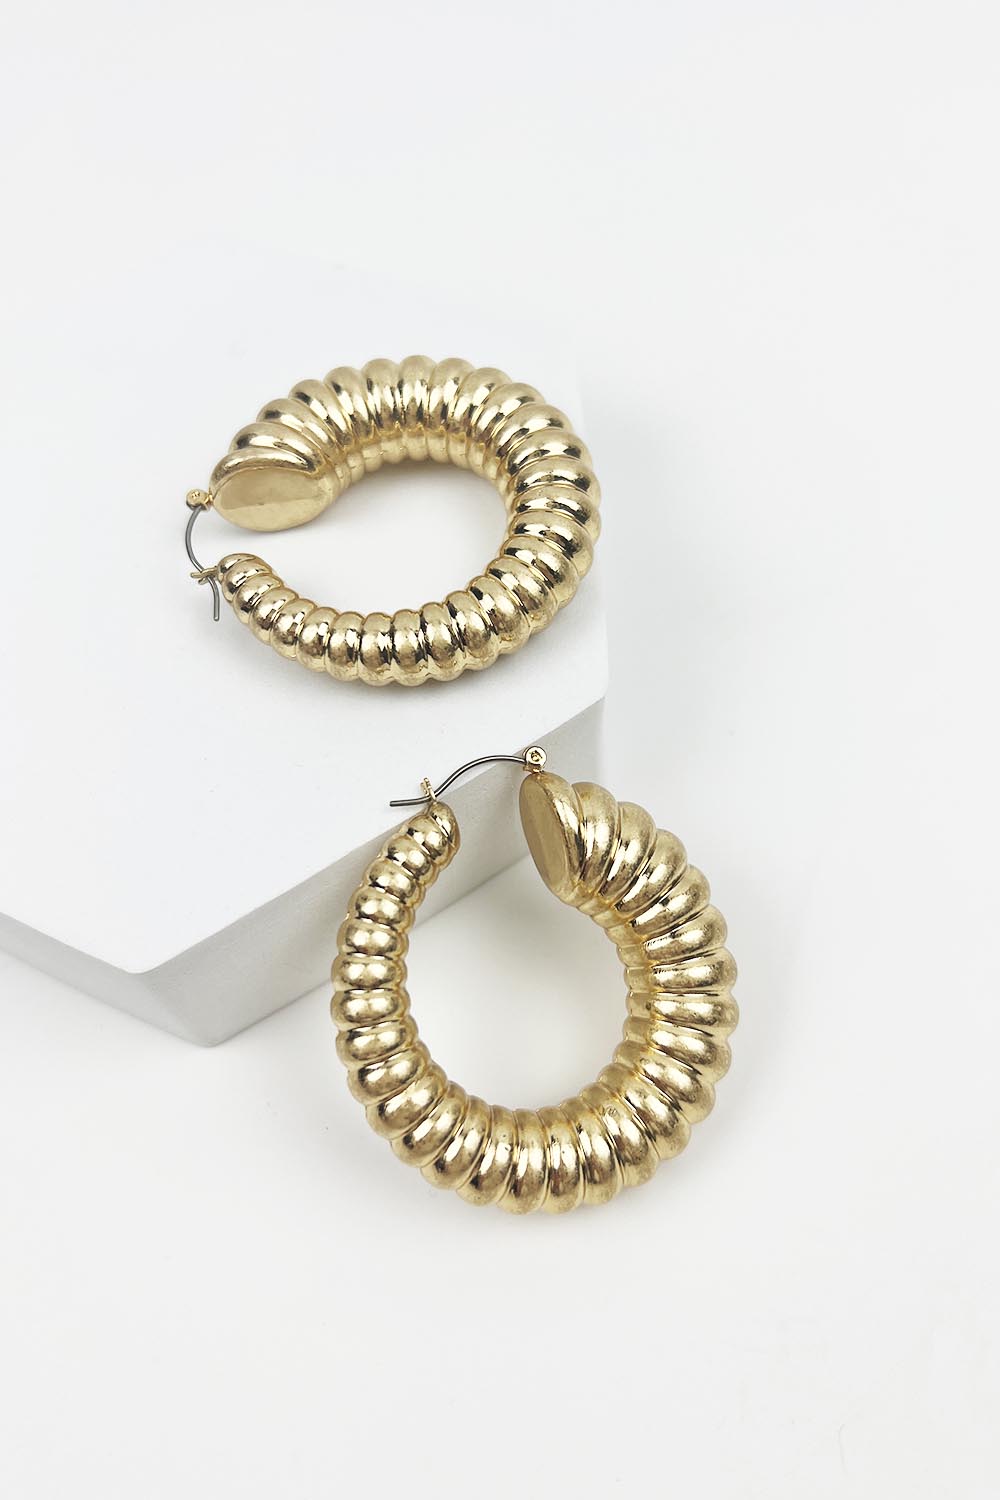 2 IN VINTAGE GOLD SILVER PLATED HOOP EARRING WITH HYPO ALLERGENIC TITANIUM POST